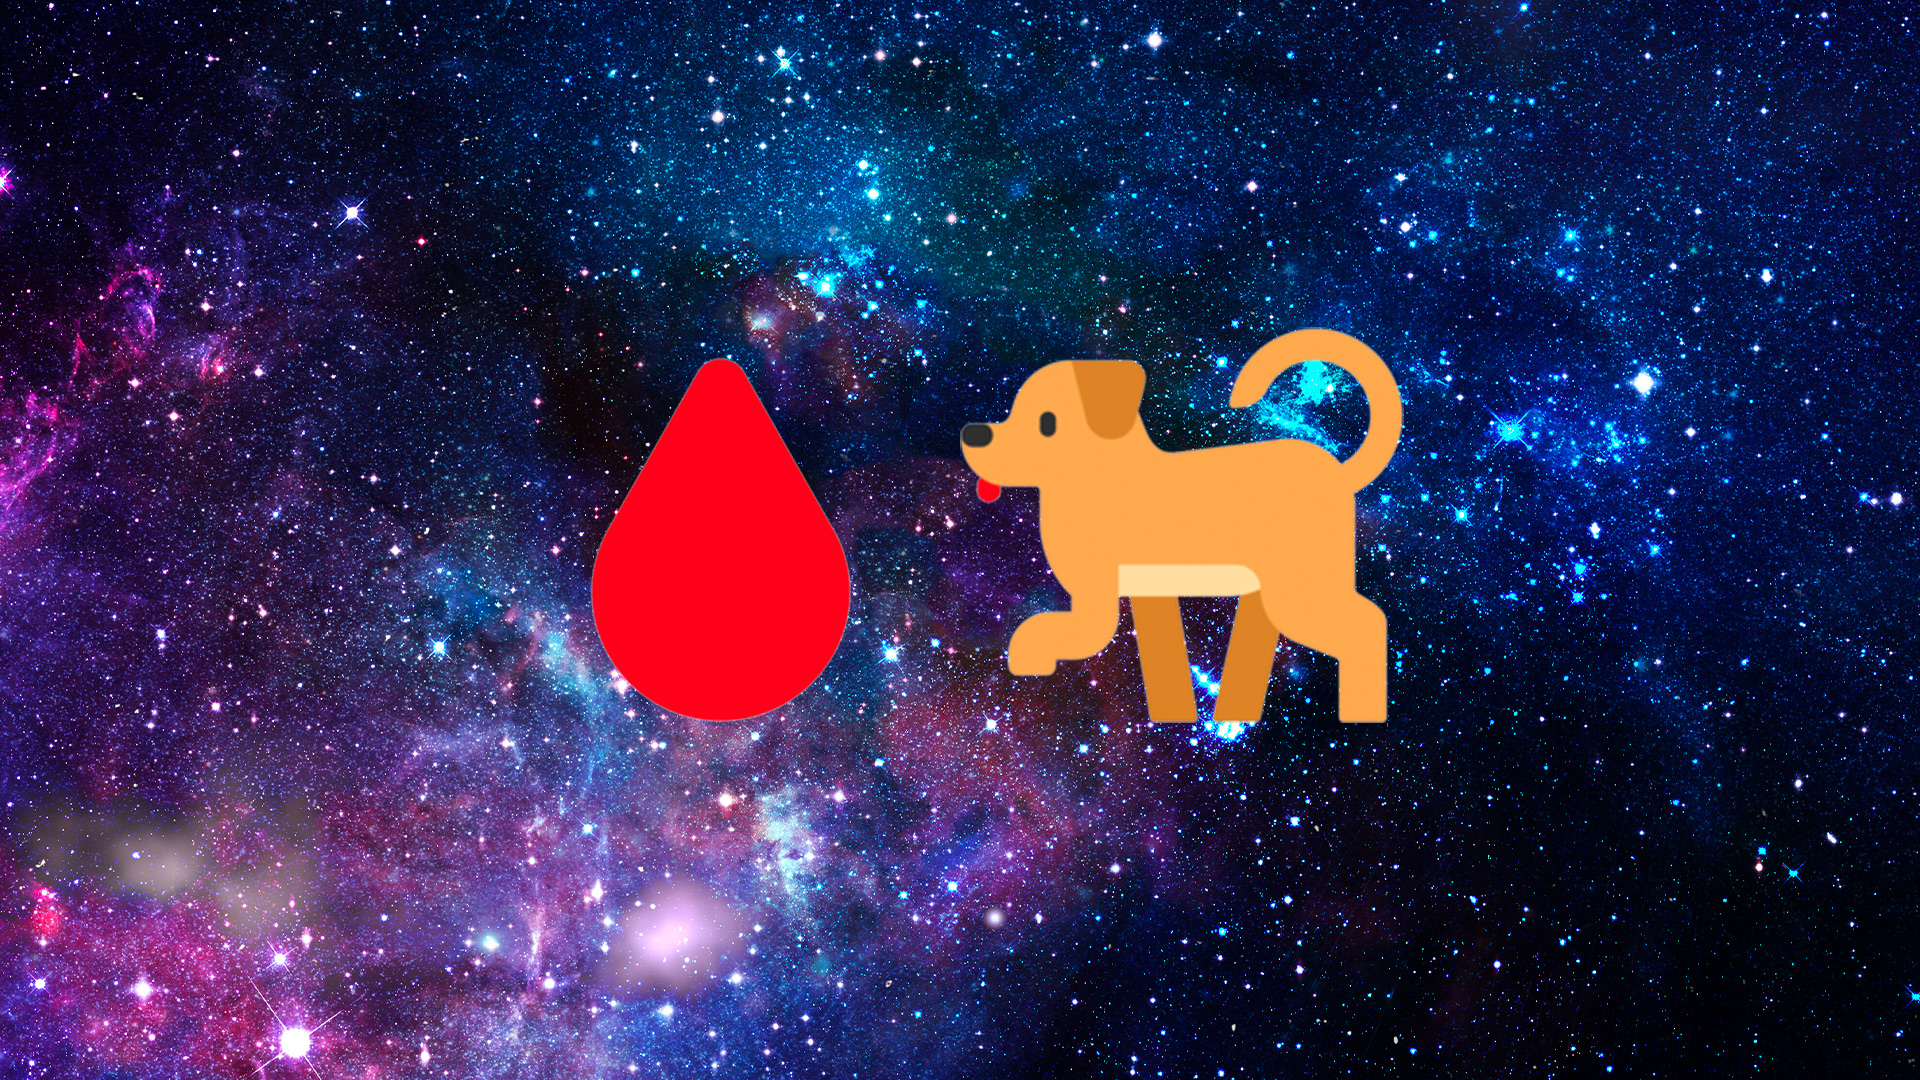 An emoji of red drop and a dog